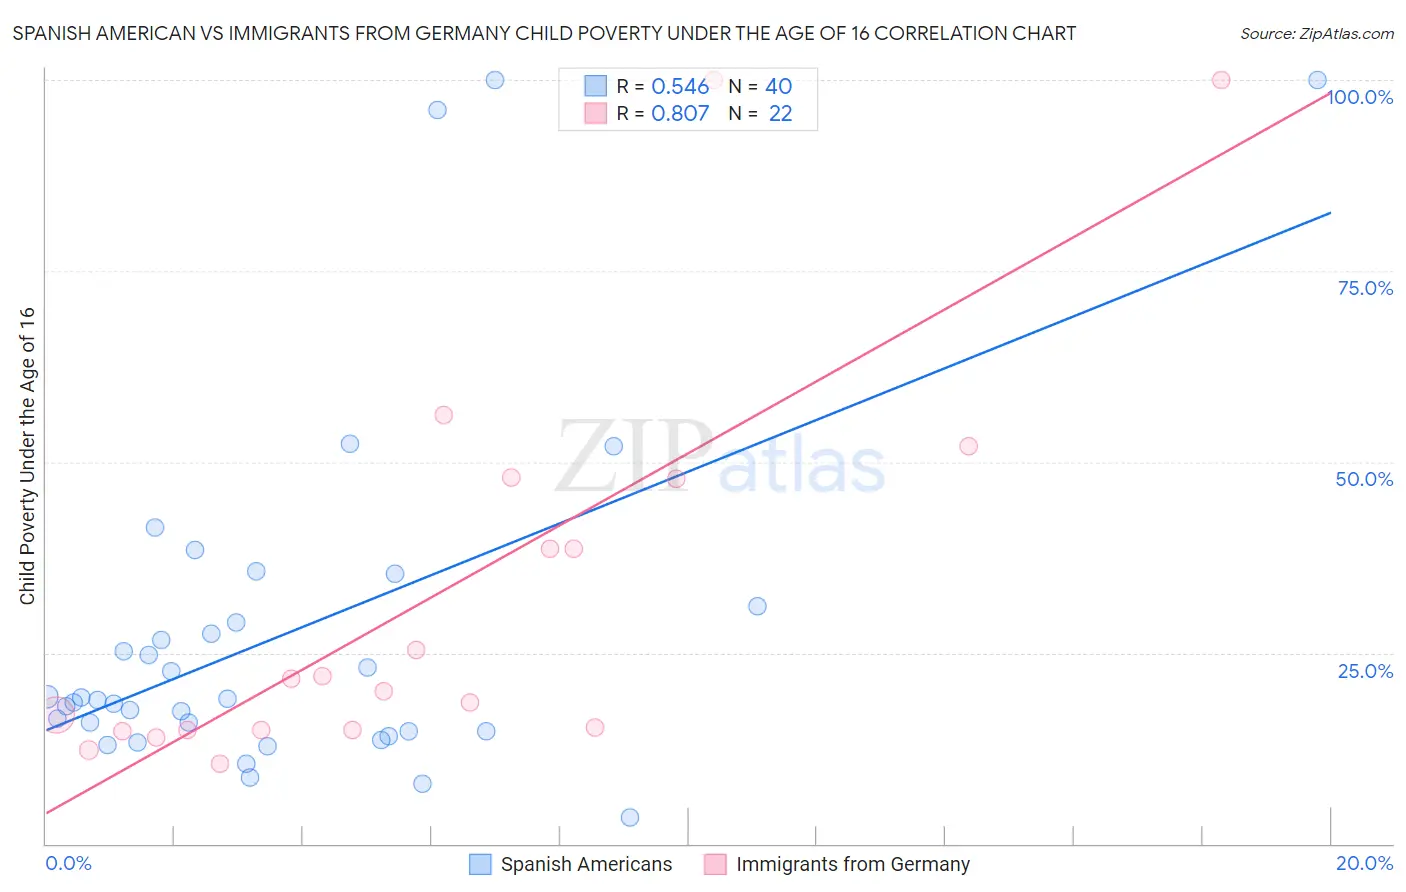 Spanish American vs Immigrants from Germany Child Poverty Under the Age of 16